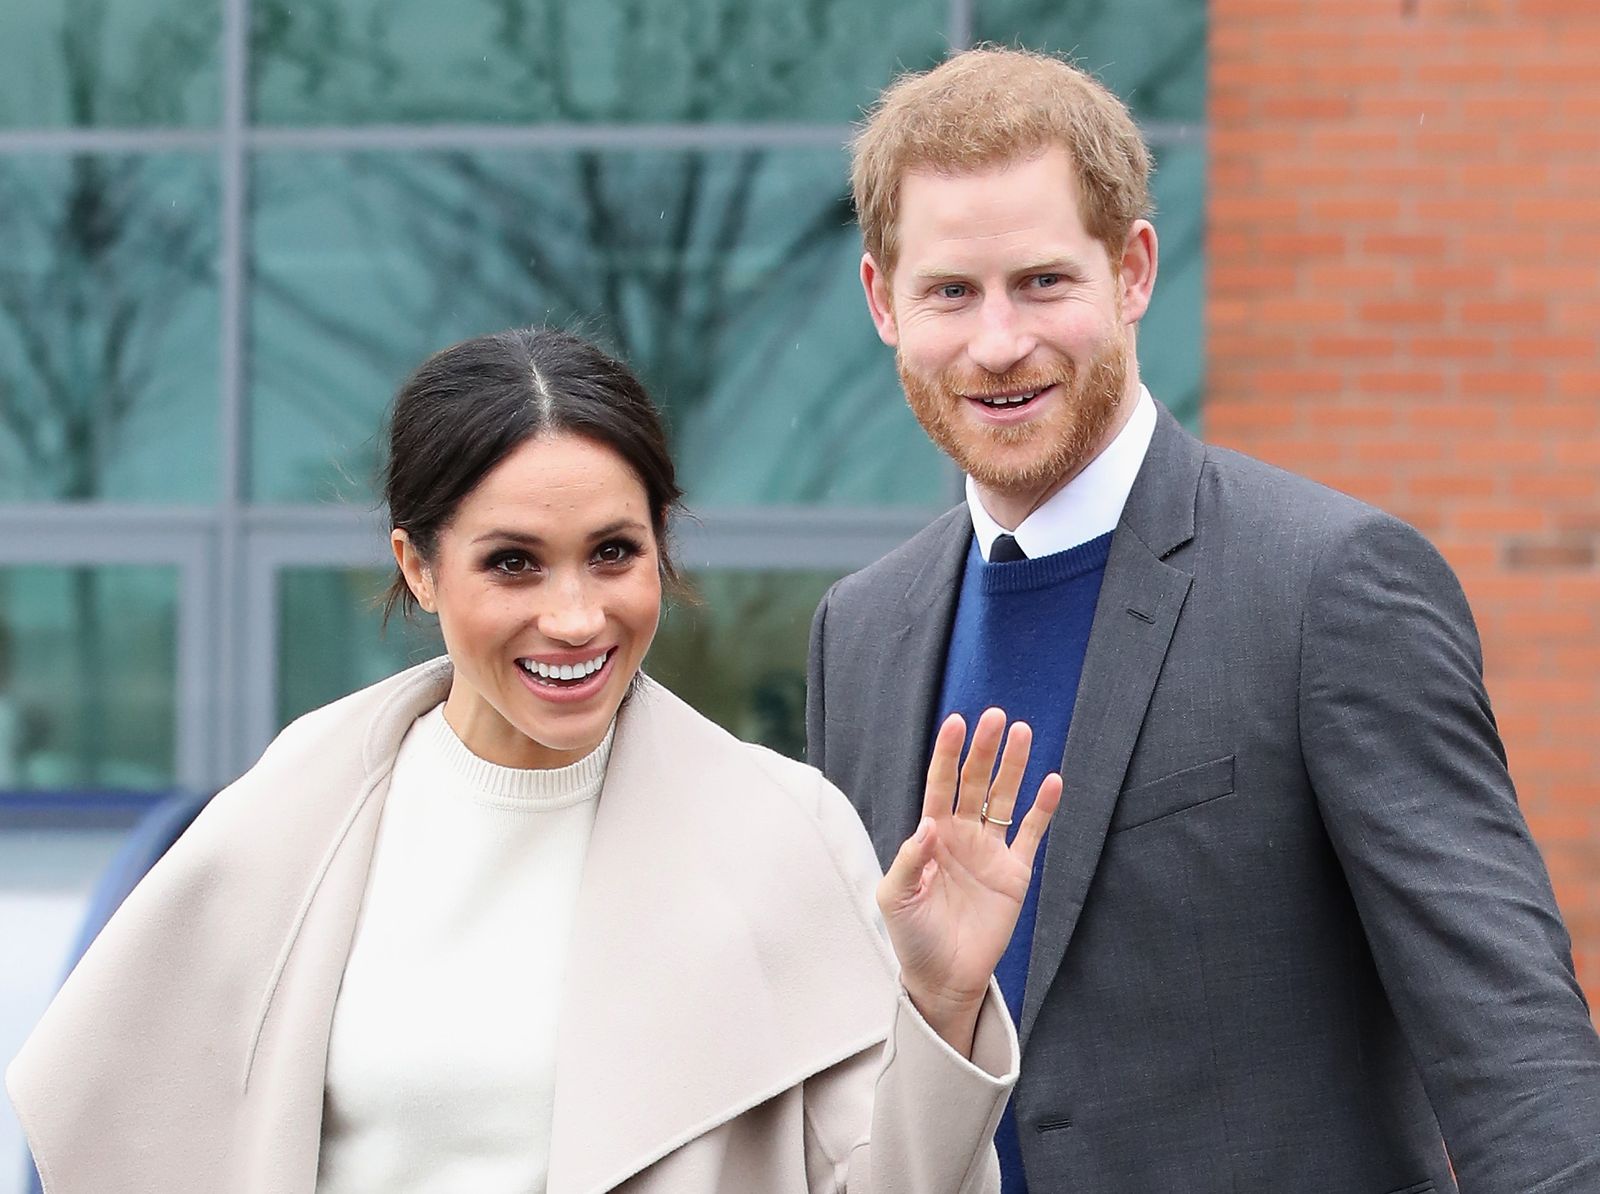 Prince Harry and Meghan Markle depart from Catalyst Inc science park on March 23, 2018 in Belfast, Nothern Ireland. | Photo: Getty Images